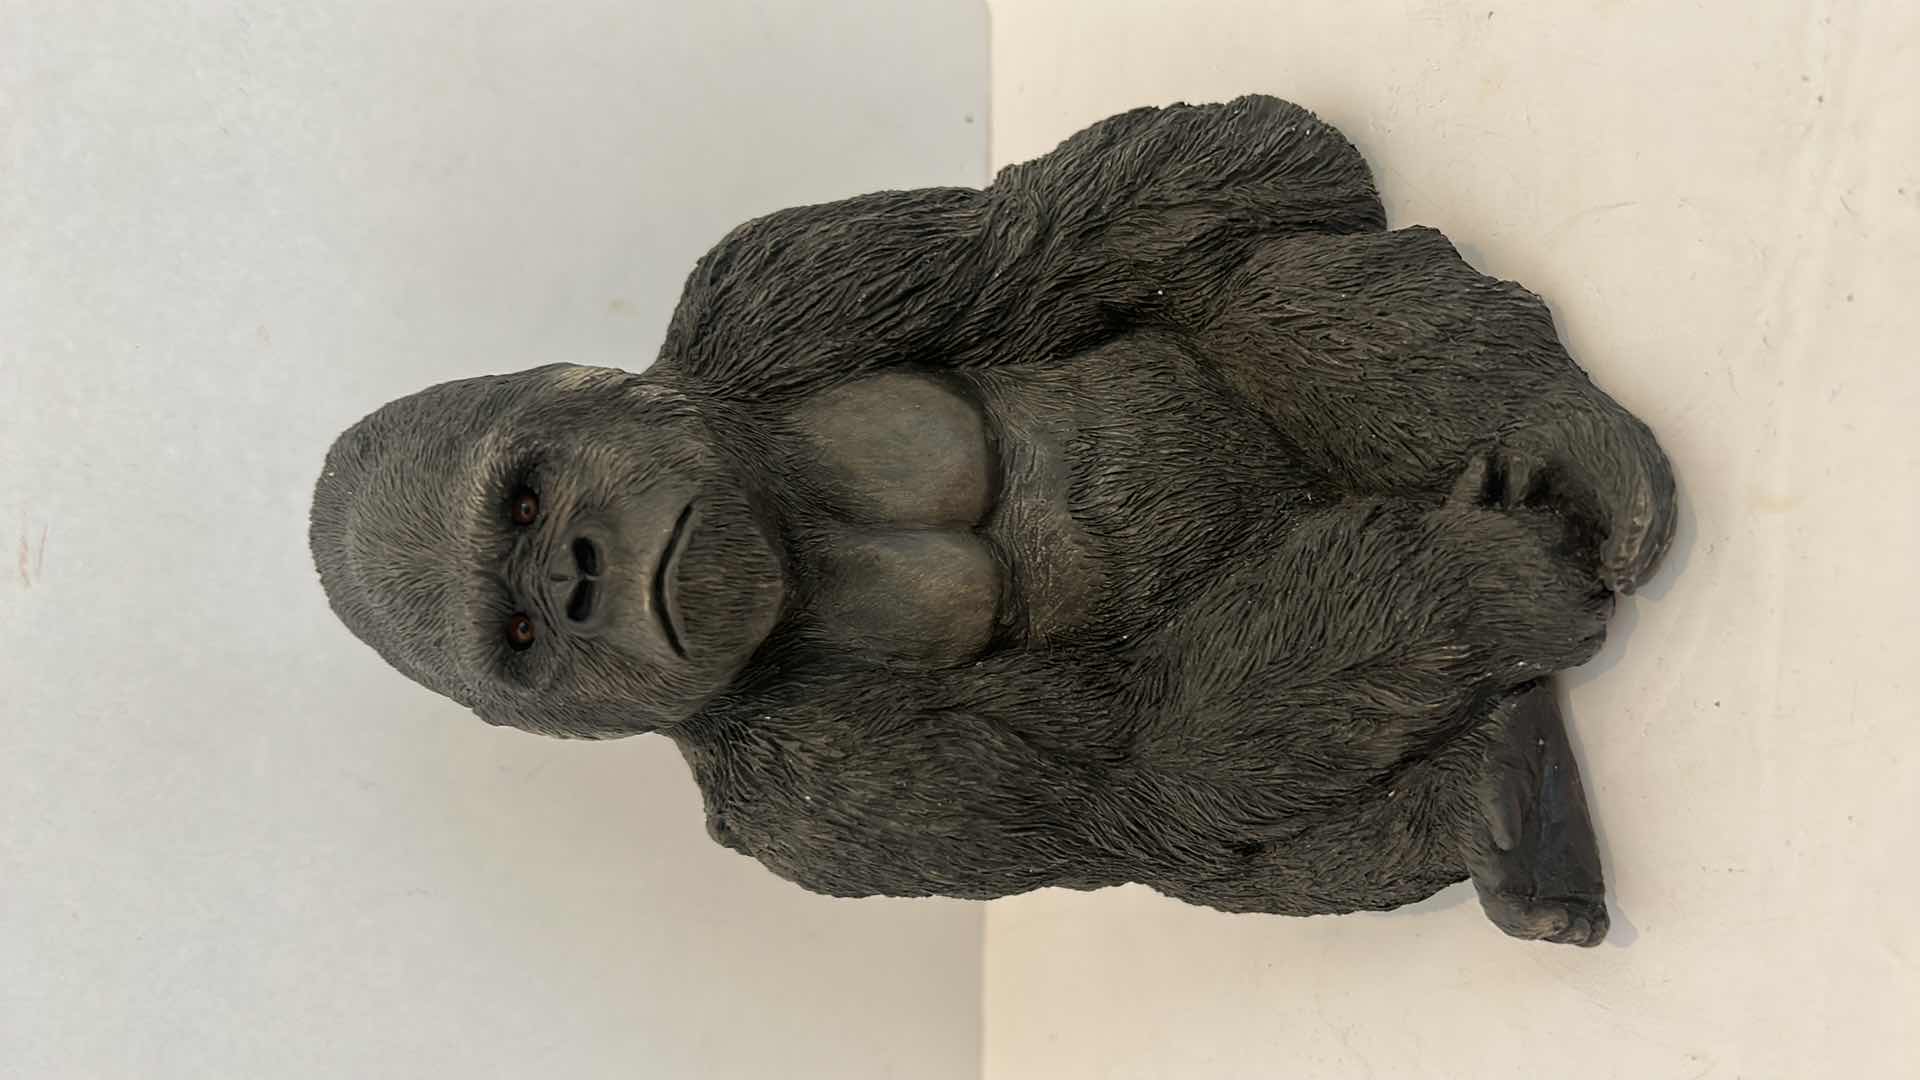 Photo 5 of LIMITED EDITION NUMBERED ENDANGERED SPECIES "LOWLAND GORILLA" BY SANDRA BRUE 2403/5000 H7”